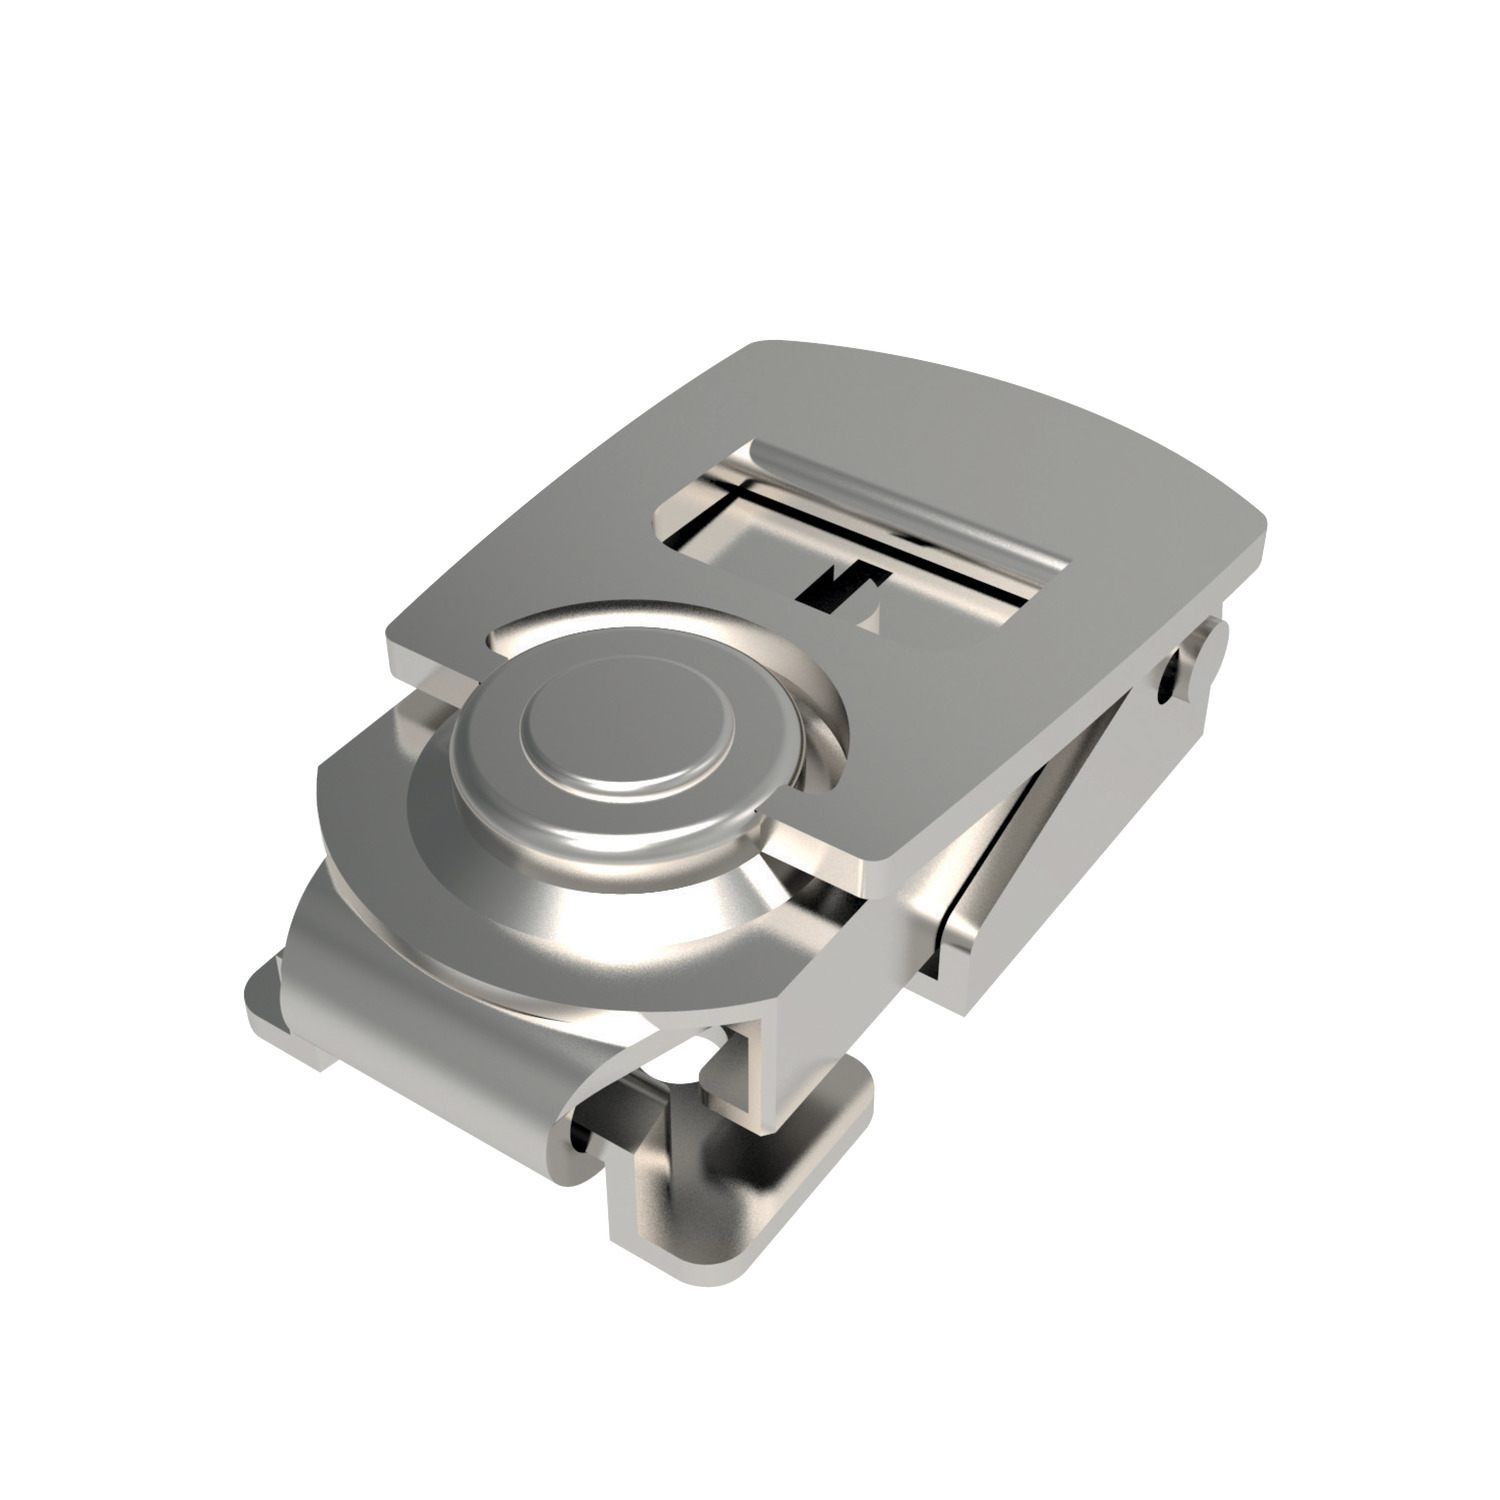 Mini Draw Latches All parts made from stainless steel, AISI 304. Compact size, high strength. Single key supplied.